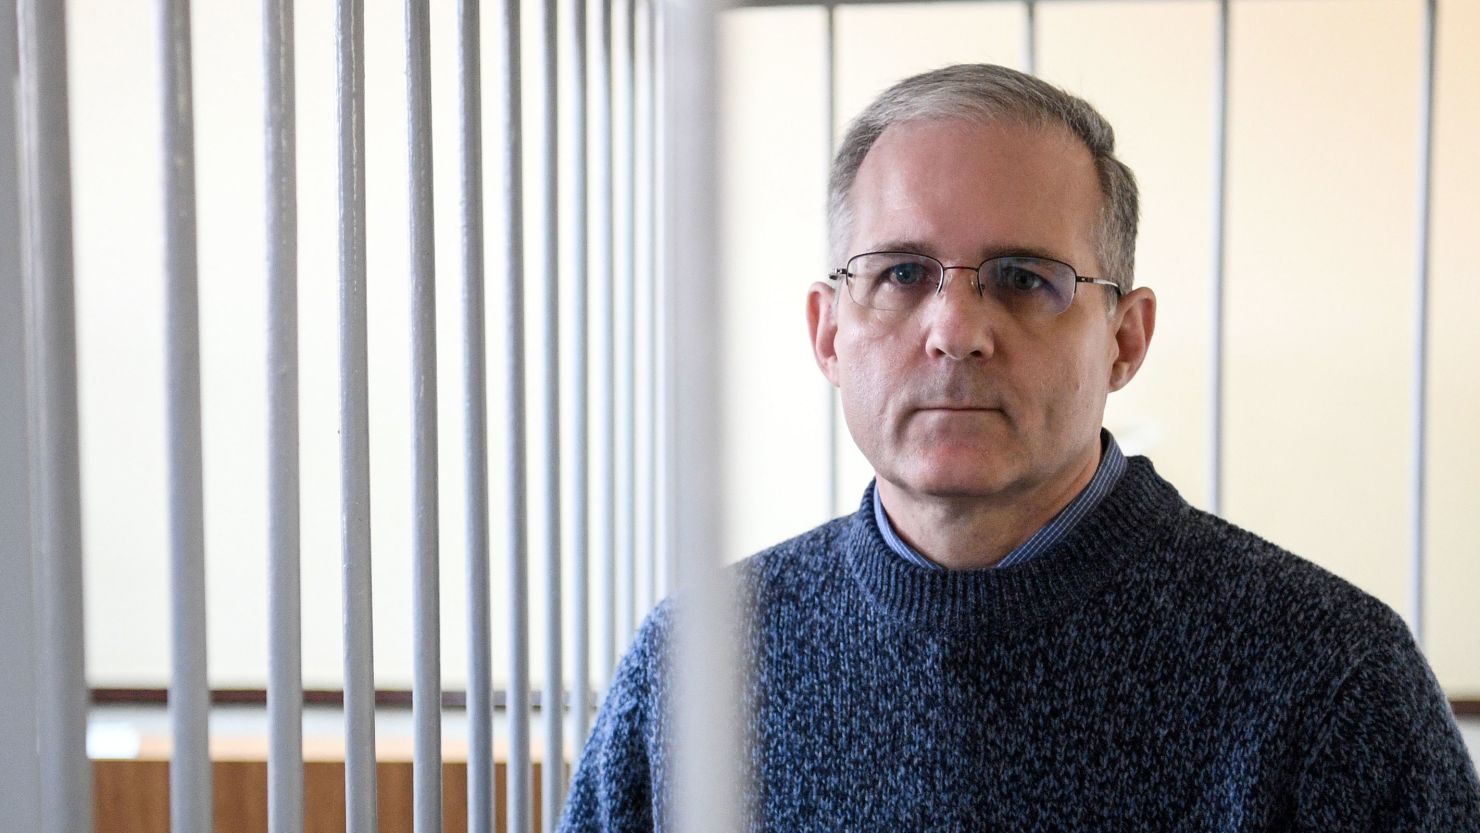 Paul Whelan, a former US Marine accused of spying and arrested in Russia stands inside a defendants' cage during a hearing at a court in Moscow on August 23, 2019.